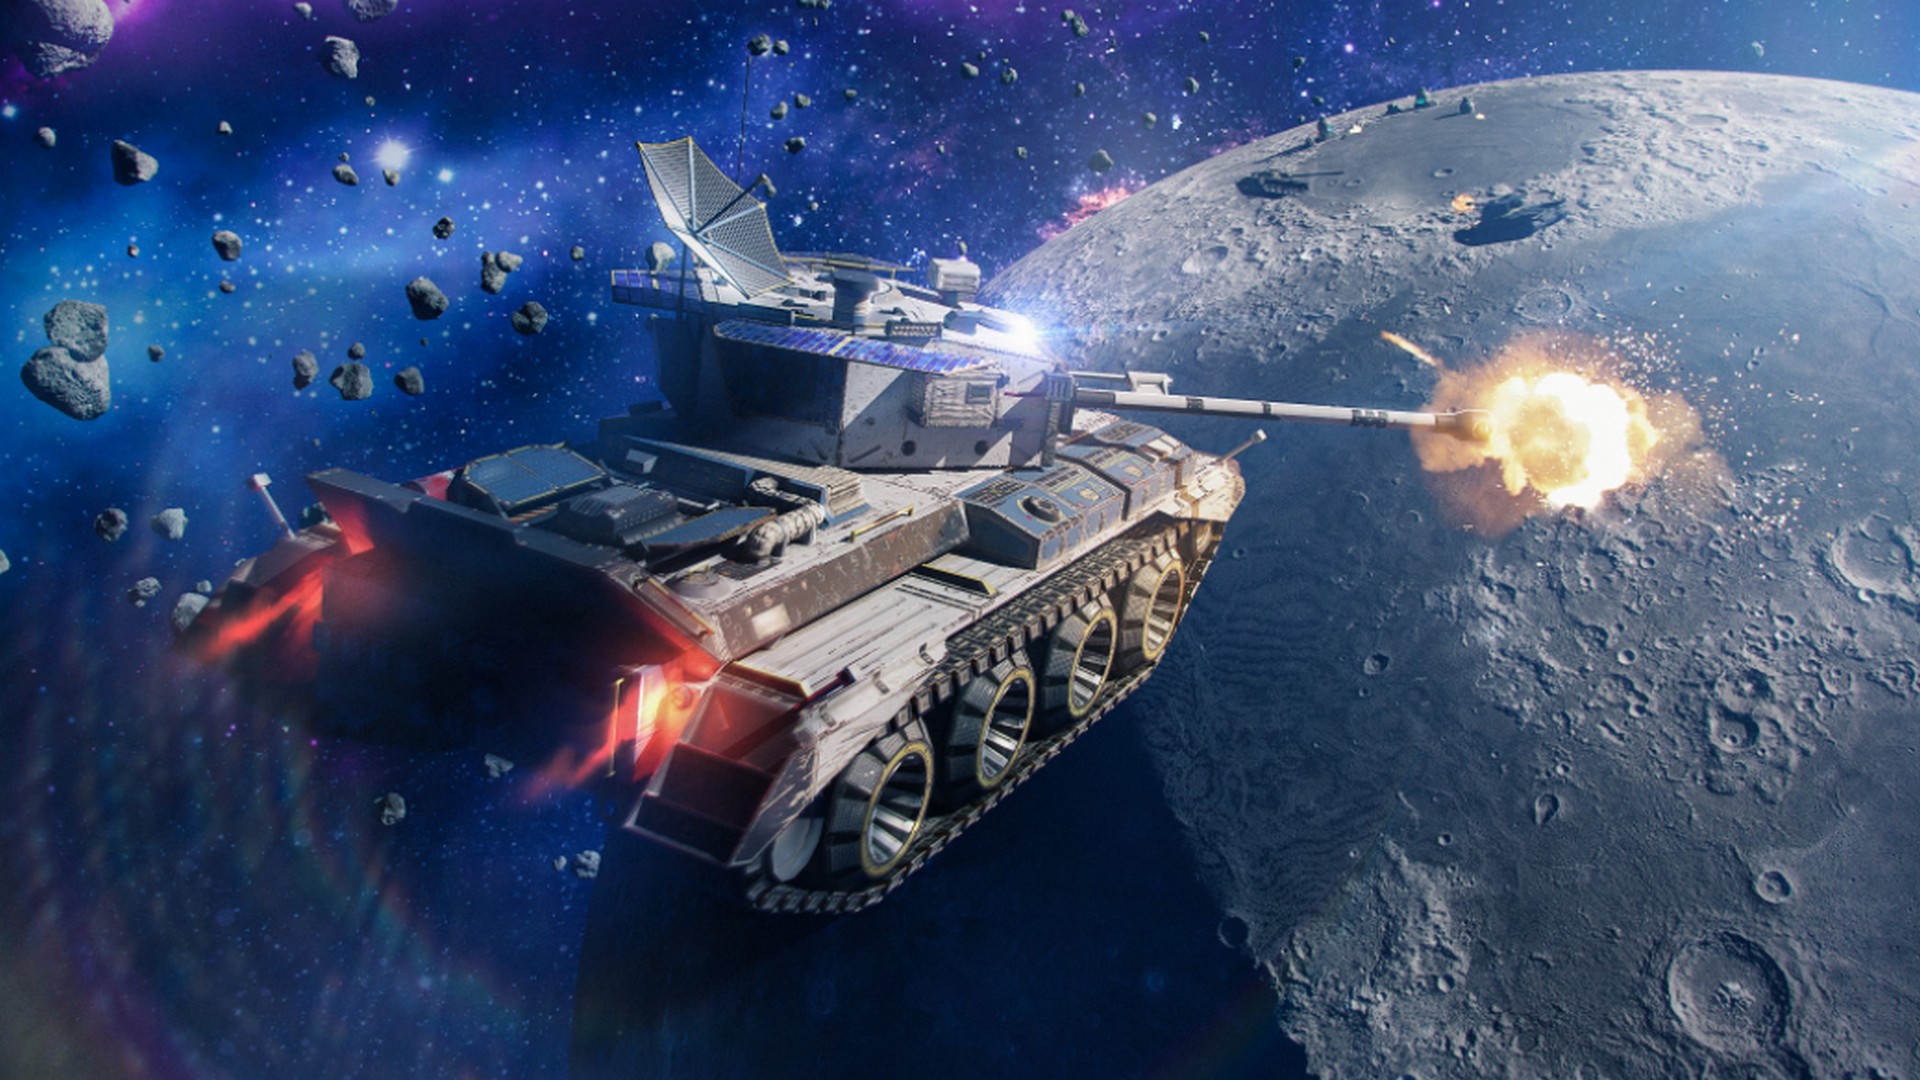 World of Tanks Blitz Launches Tanks Into Space